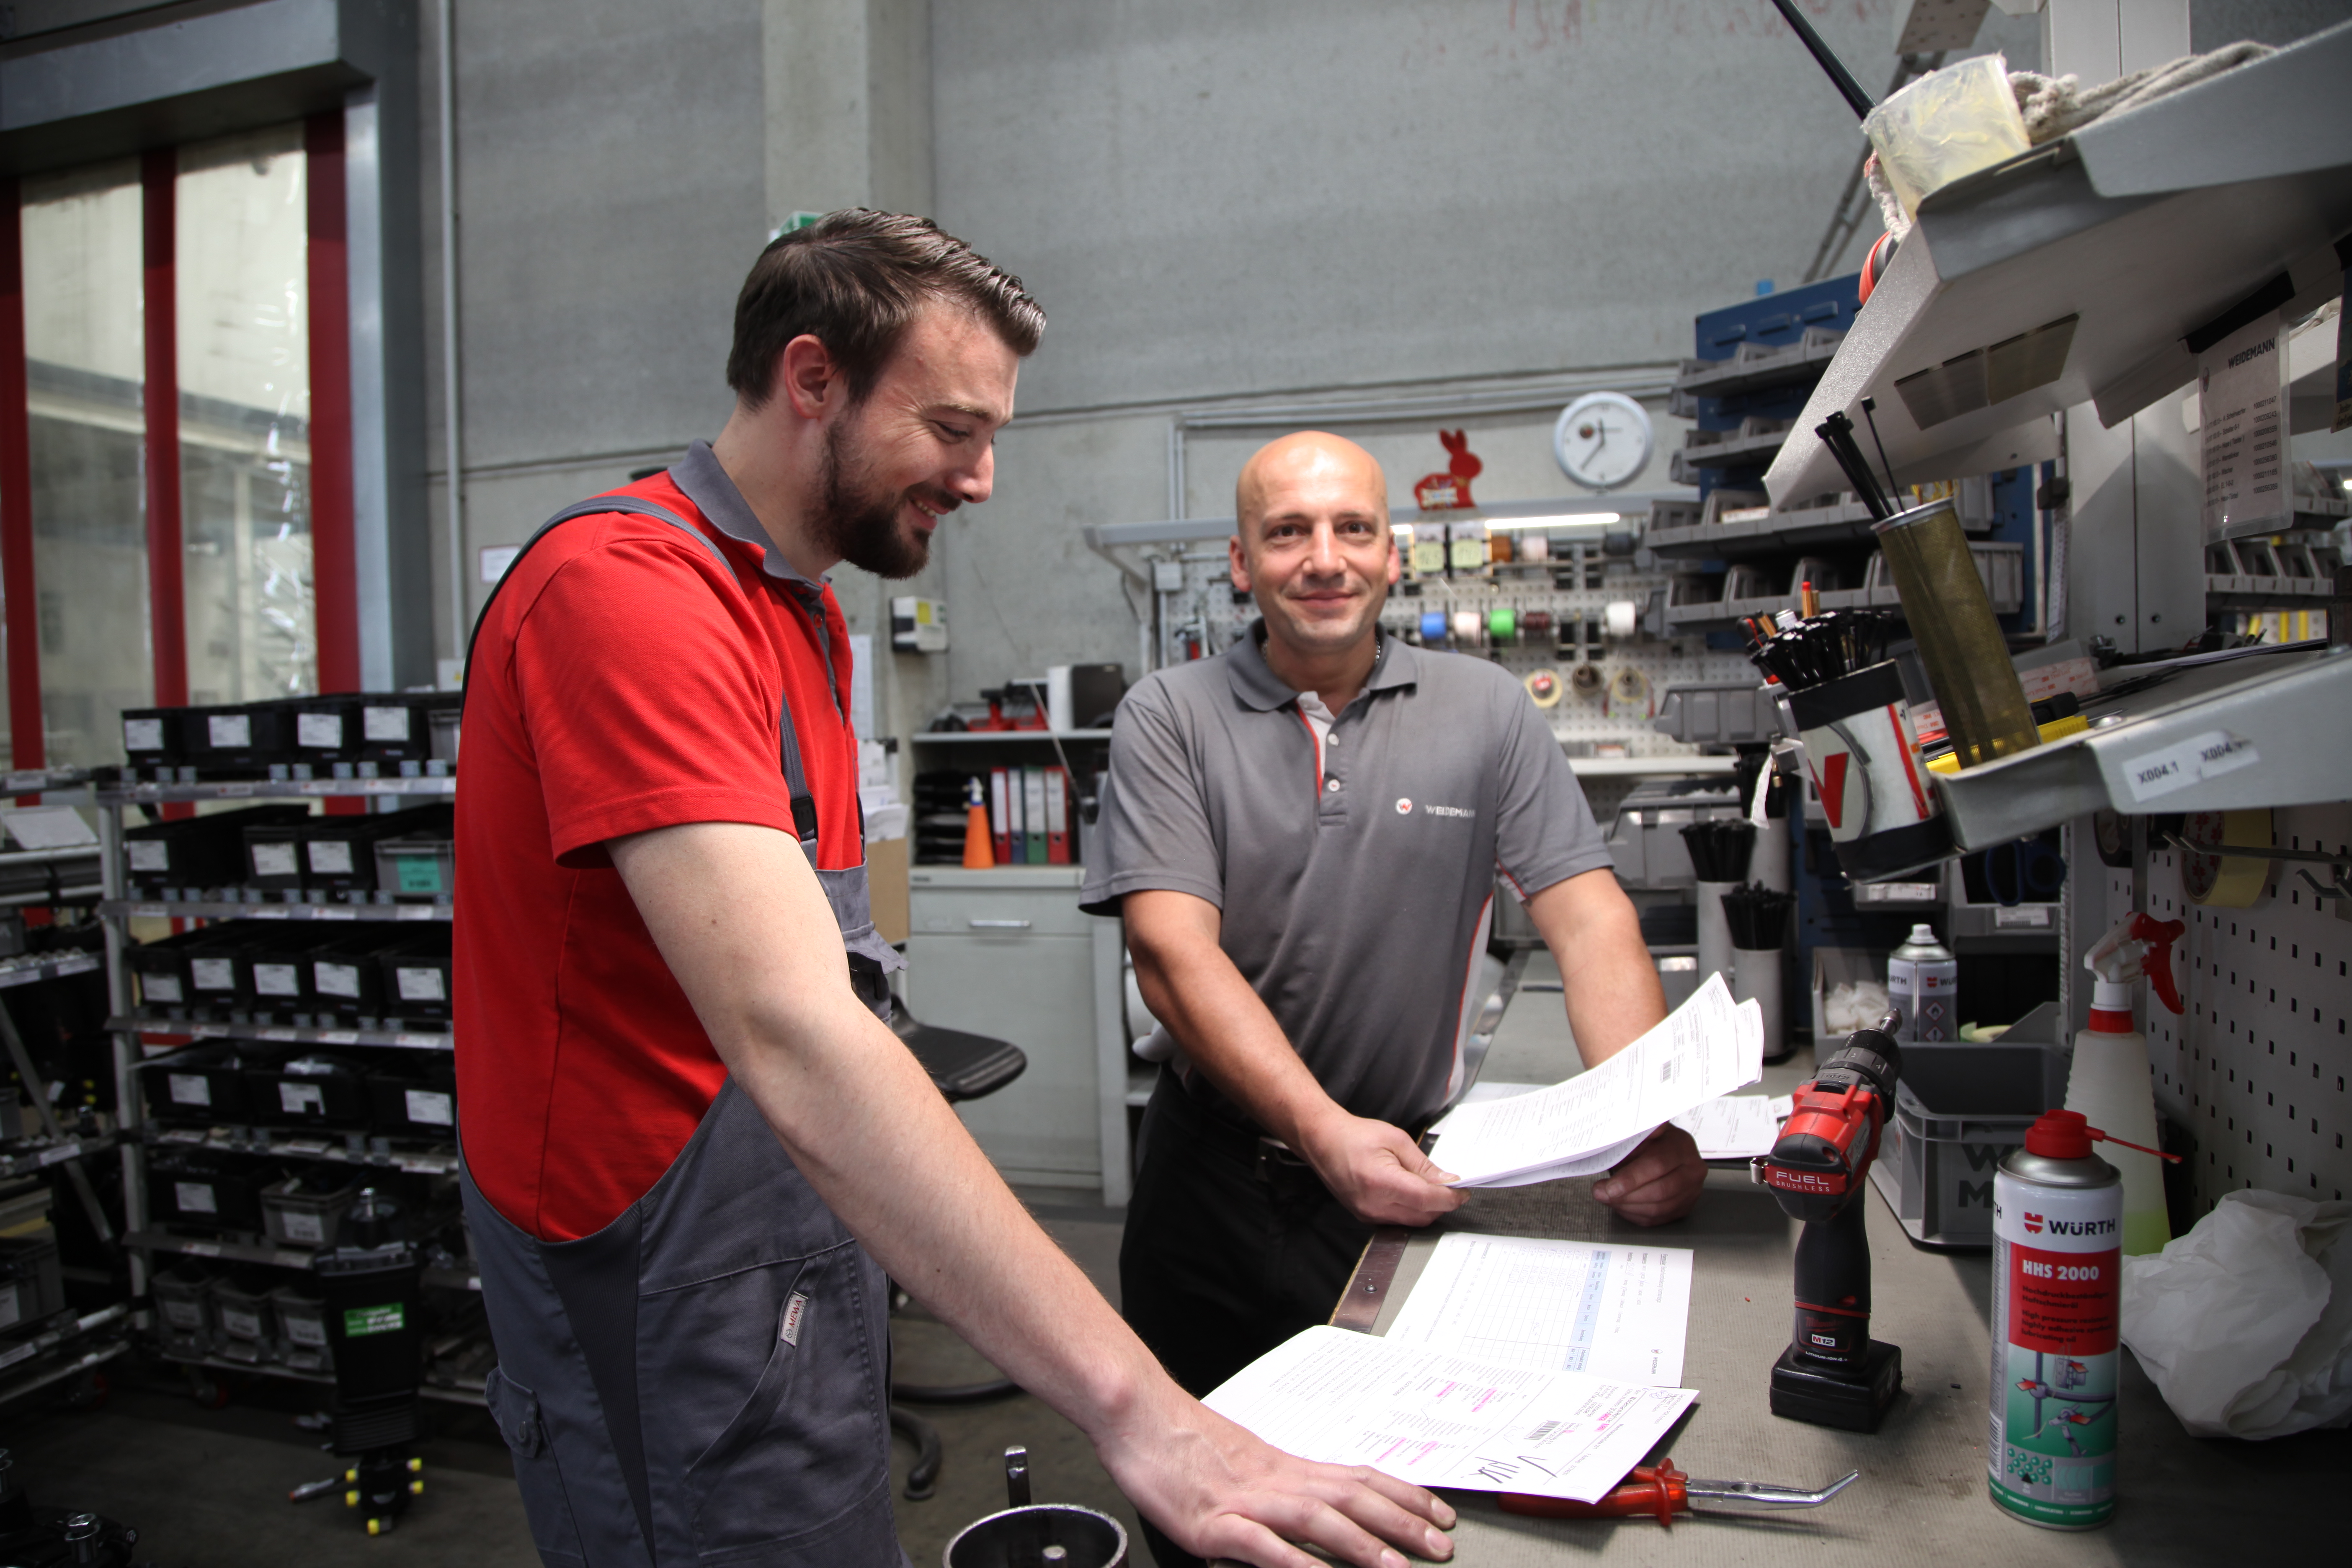 Two Weidemann employees in Production discussing something